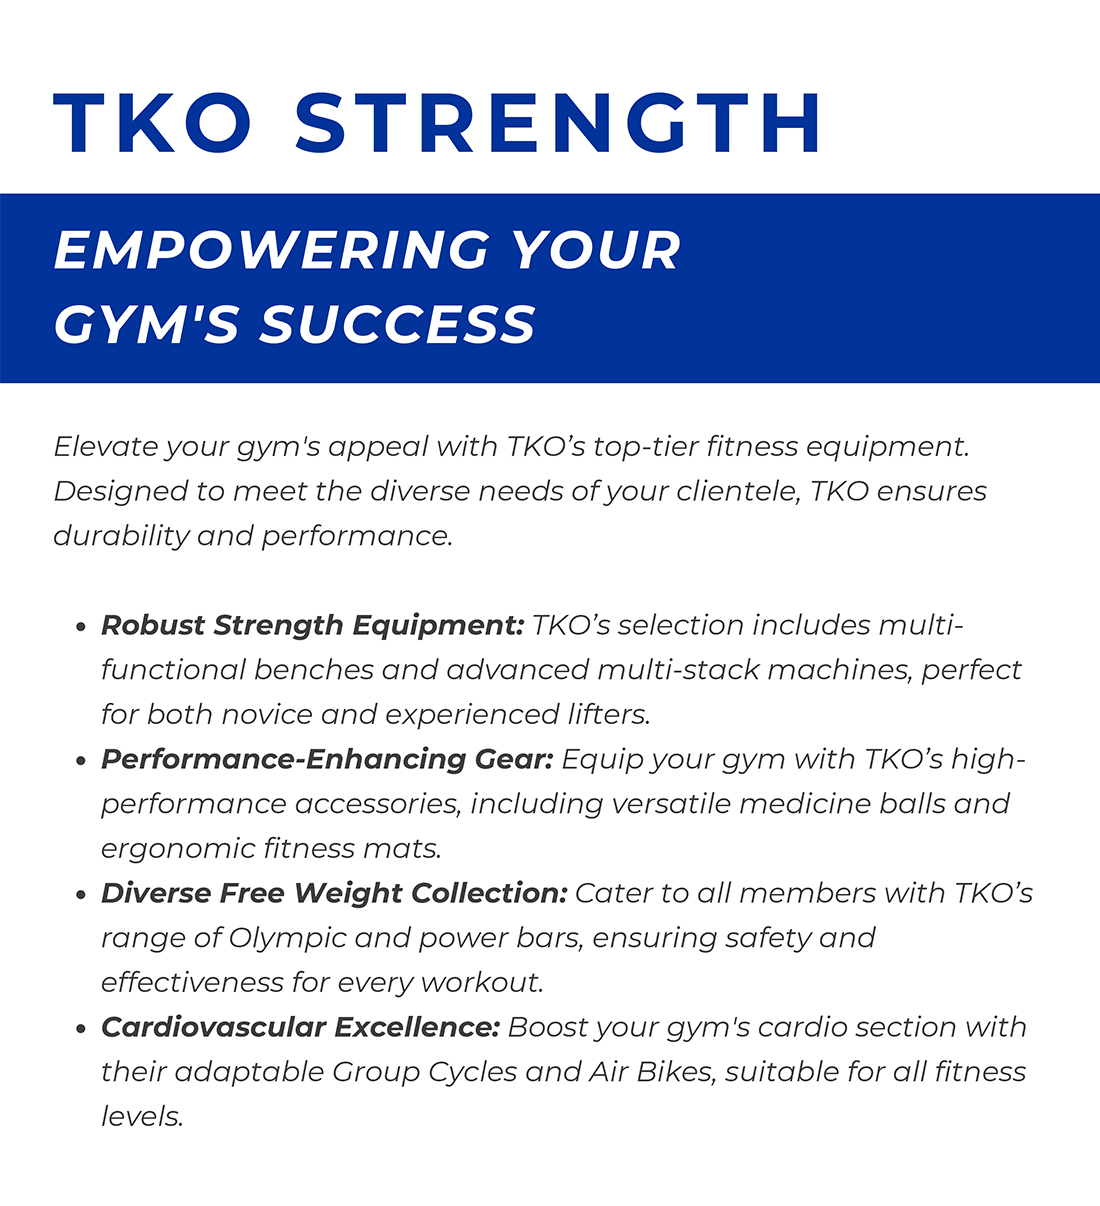 The Gym Administrator and TKO Strength Empowering Your Gym's Success